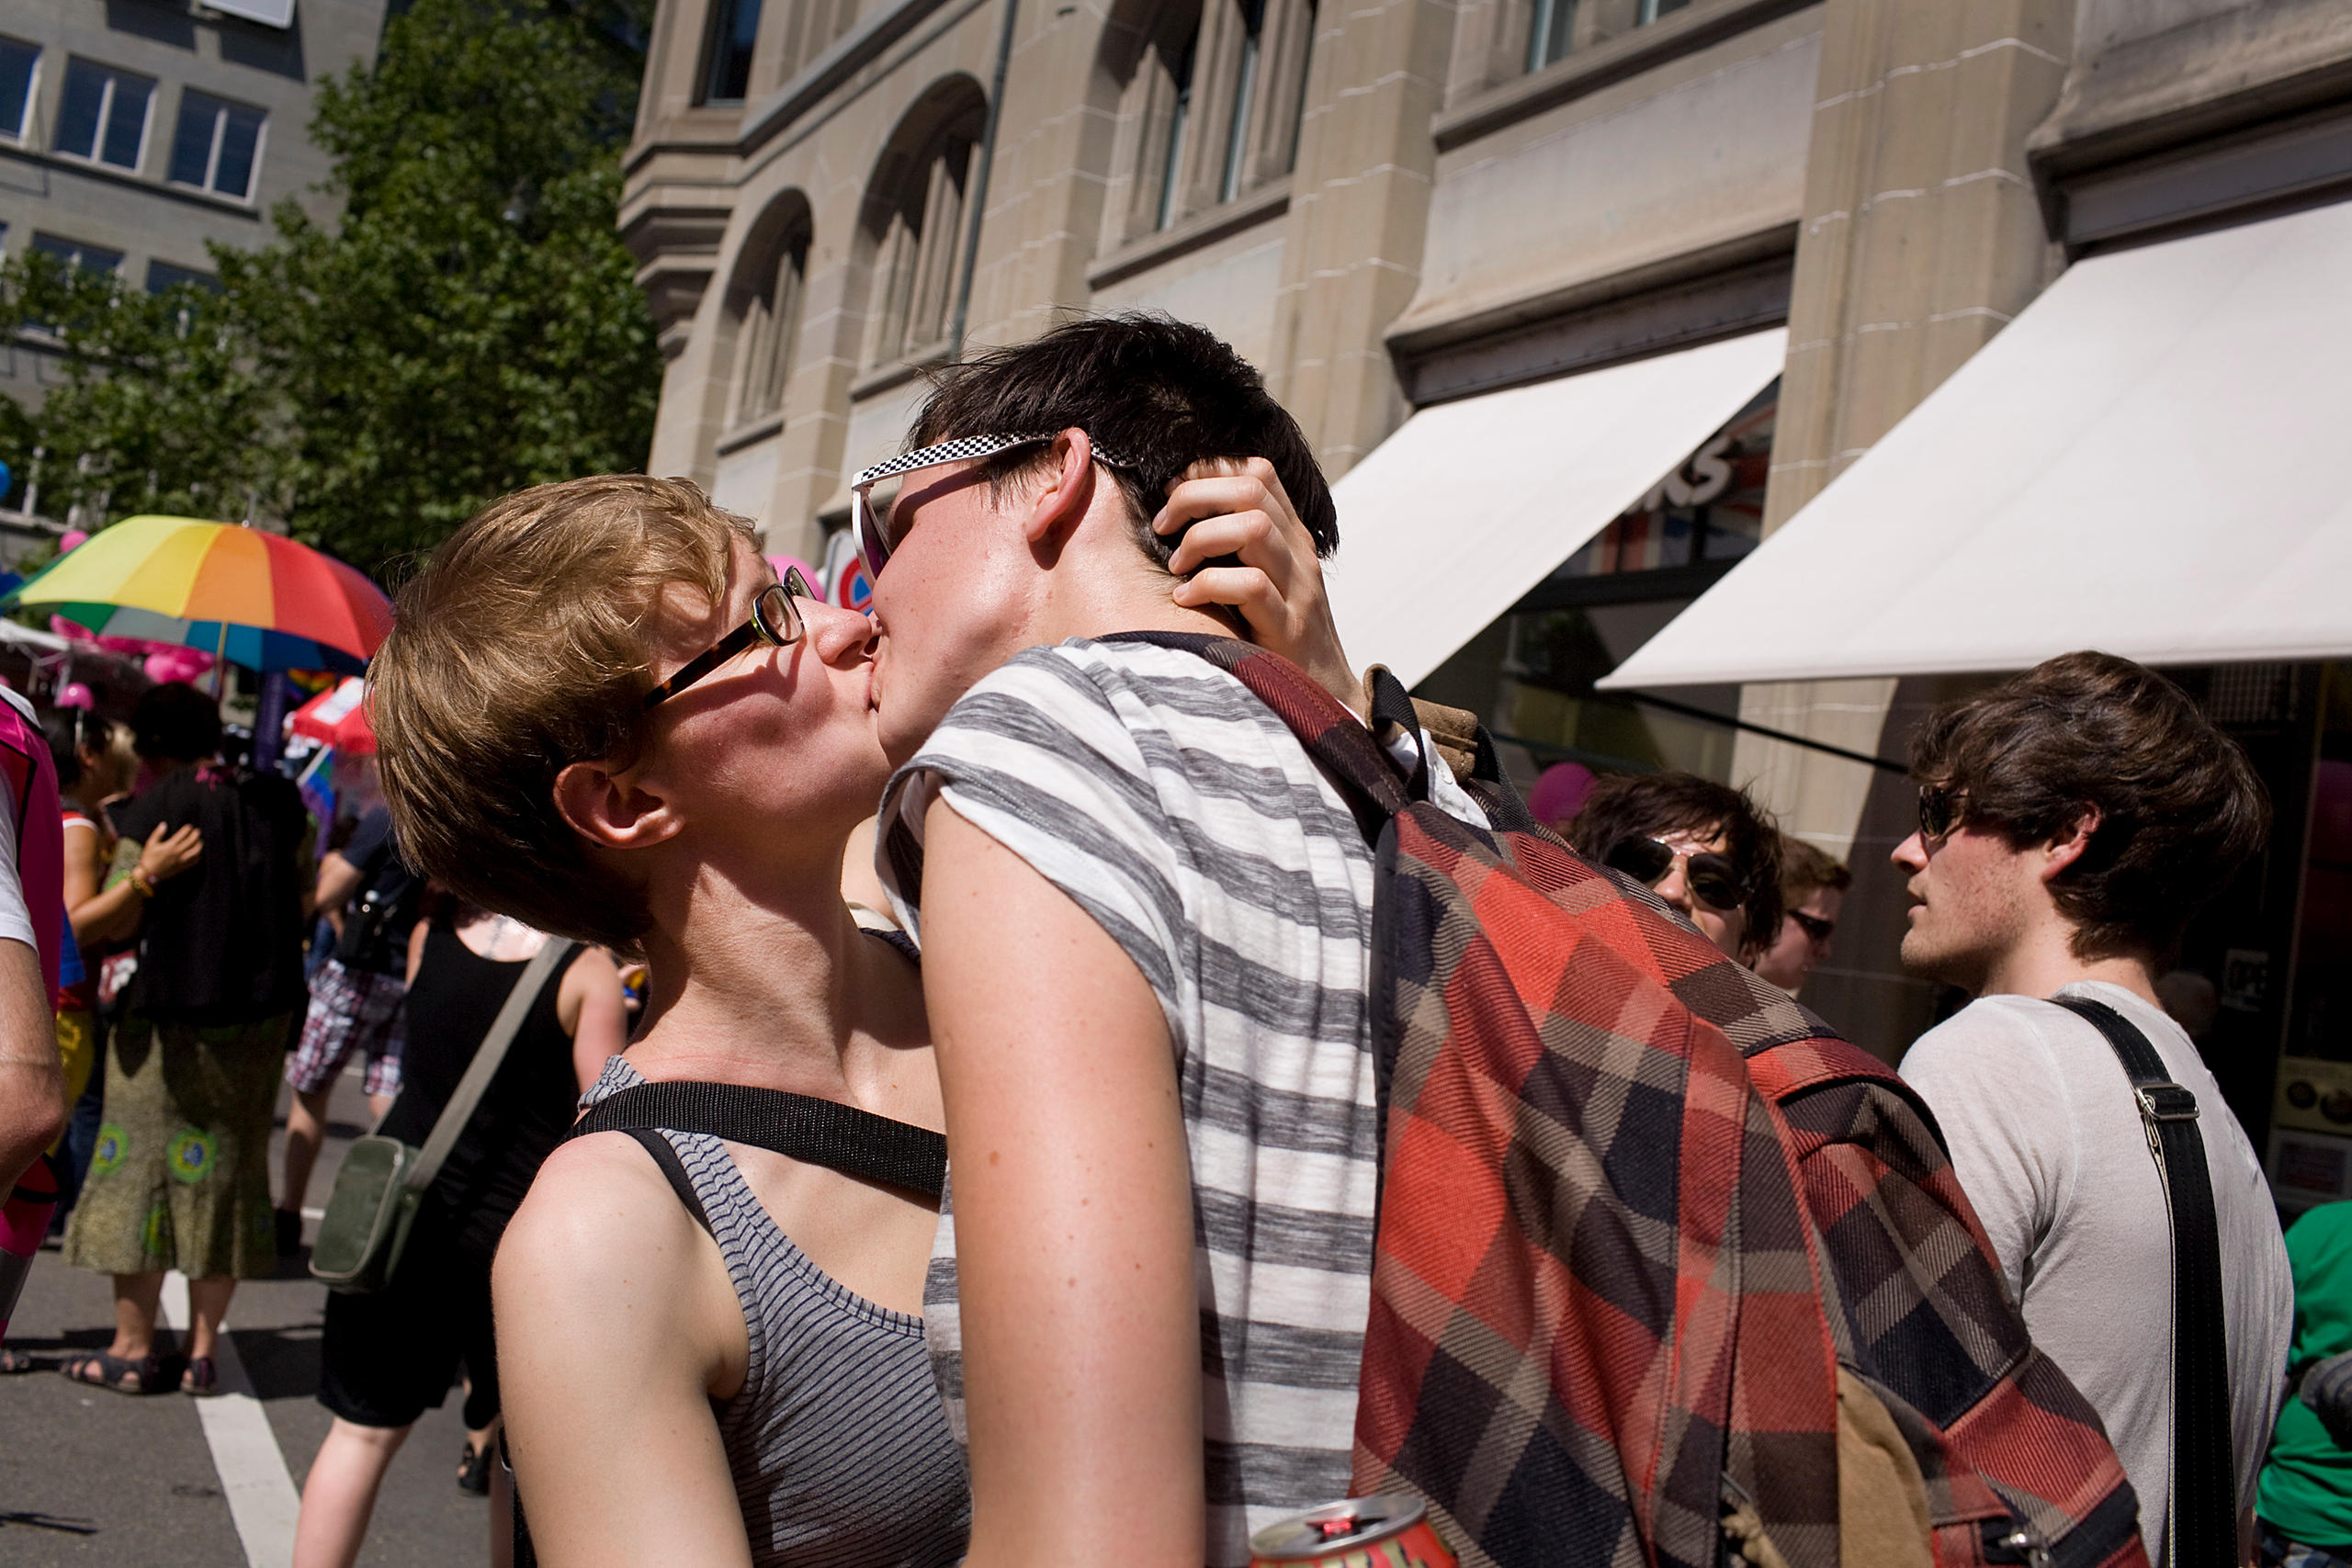 Two women kiss in a crowded street